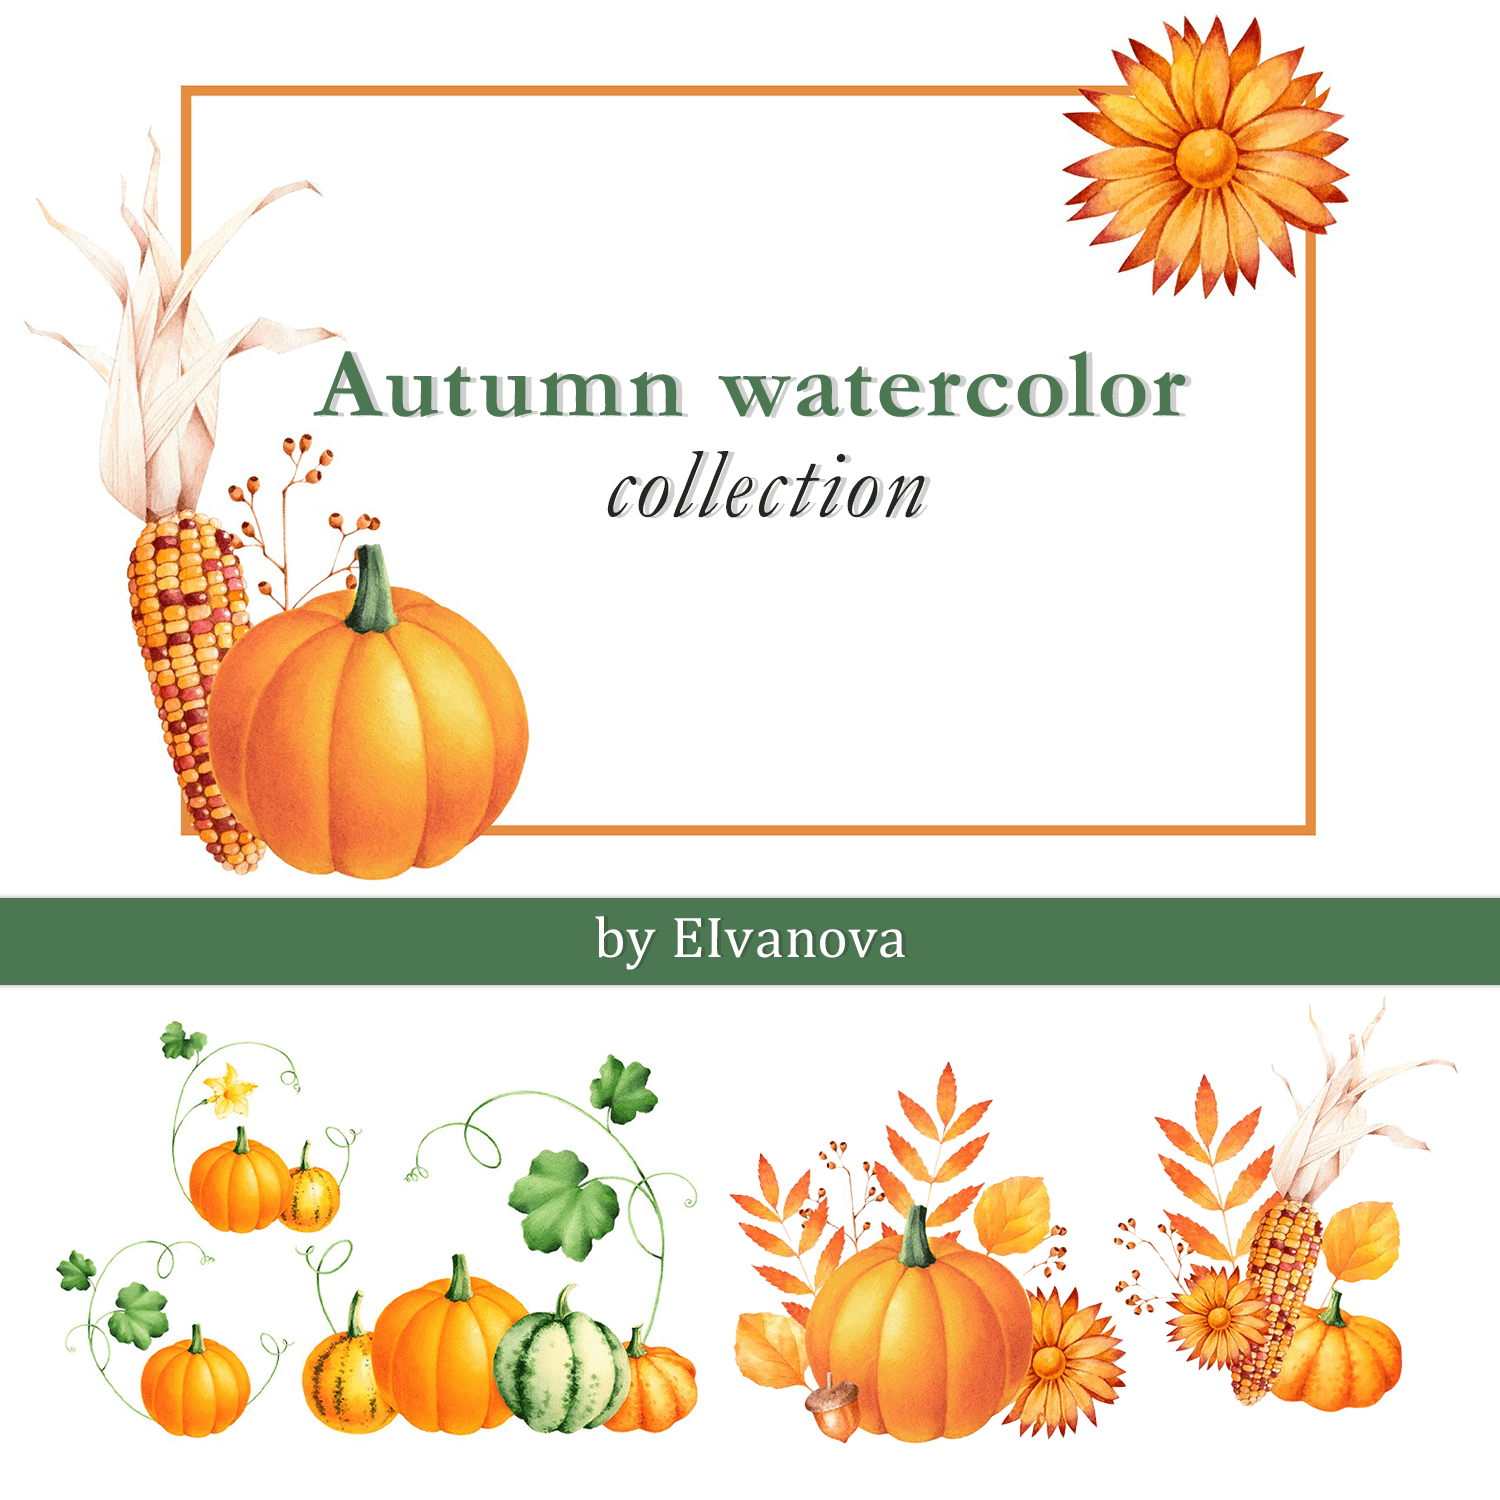 Autumn watercolor collection cover.